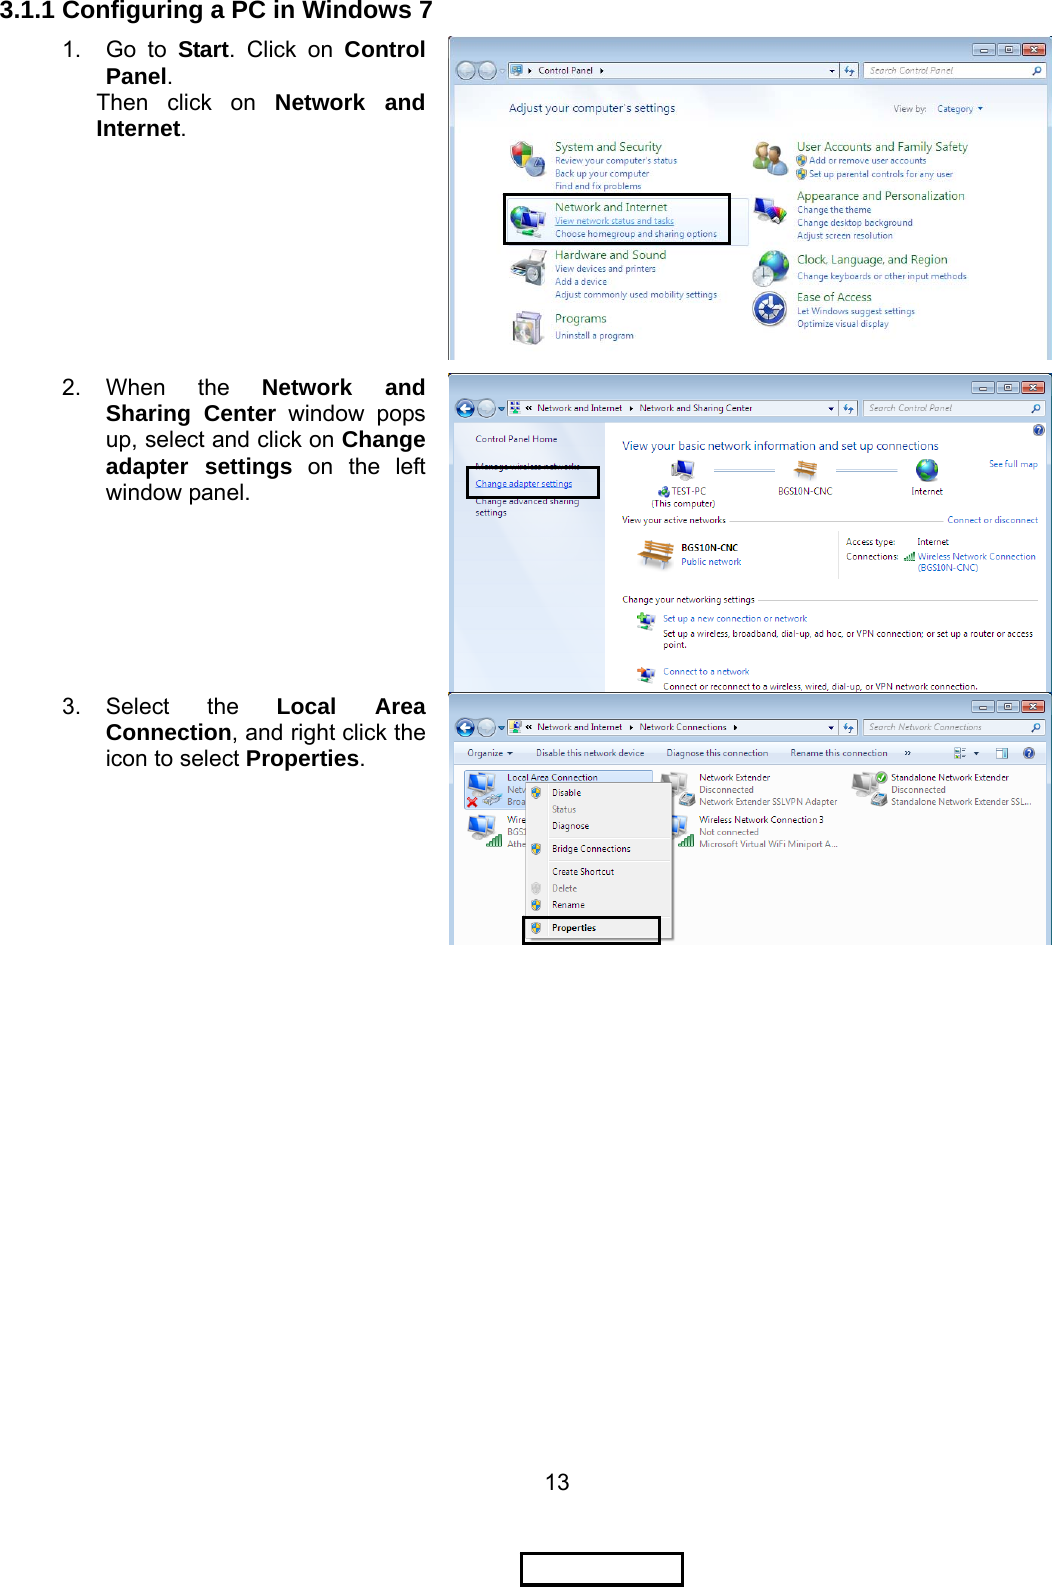 13 3.1.1 Configuring a PC in Windows 7  1. Go to Start. Click on Control Panel. Then click on Network and Internet. 2. When  the  Network and Sharing Center window pops up, select and click on Change adapter settings on the left window panel. 3. Select  the  Local Area Connection, and right click the icon to select Properties. 